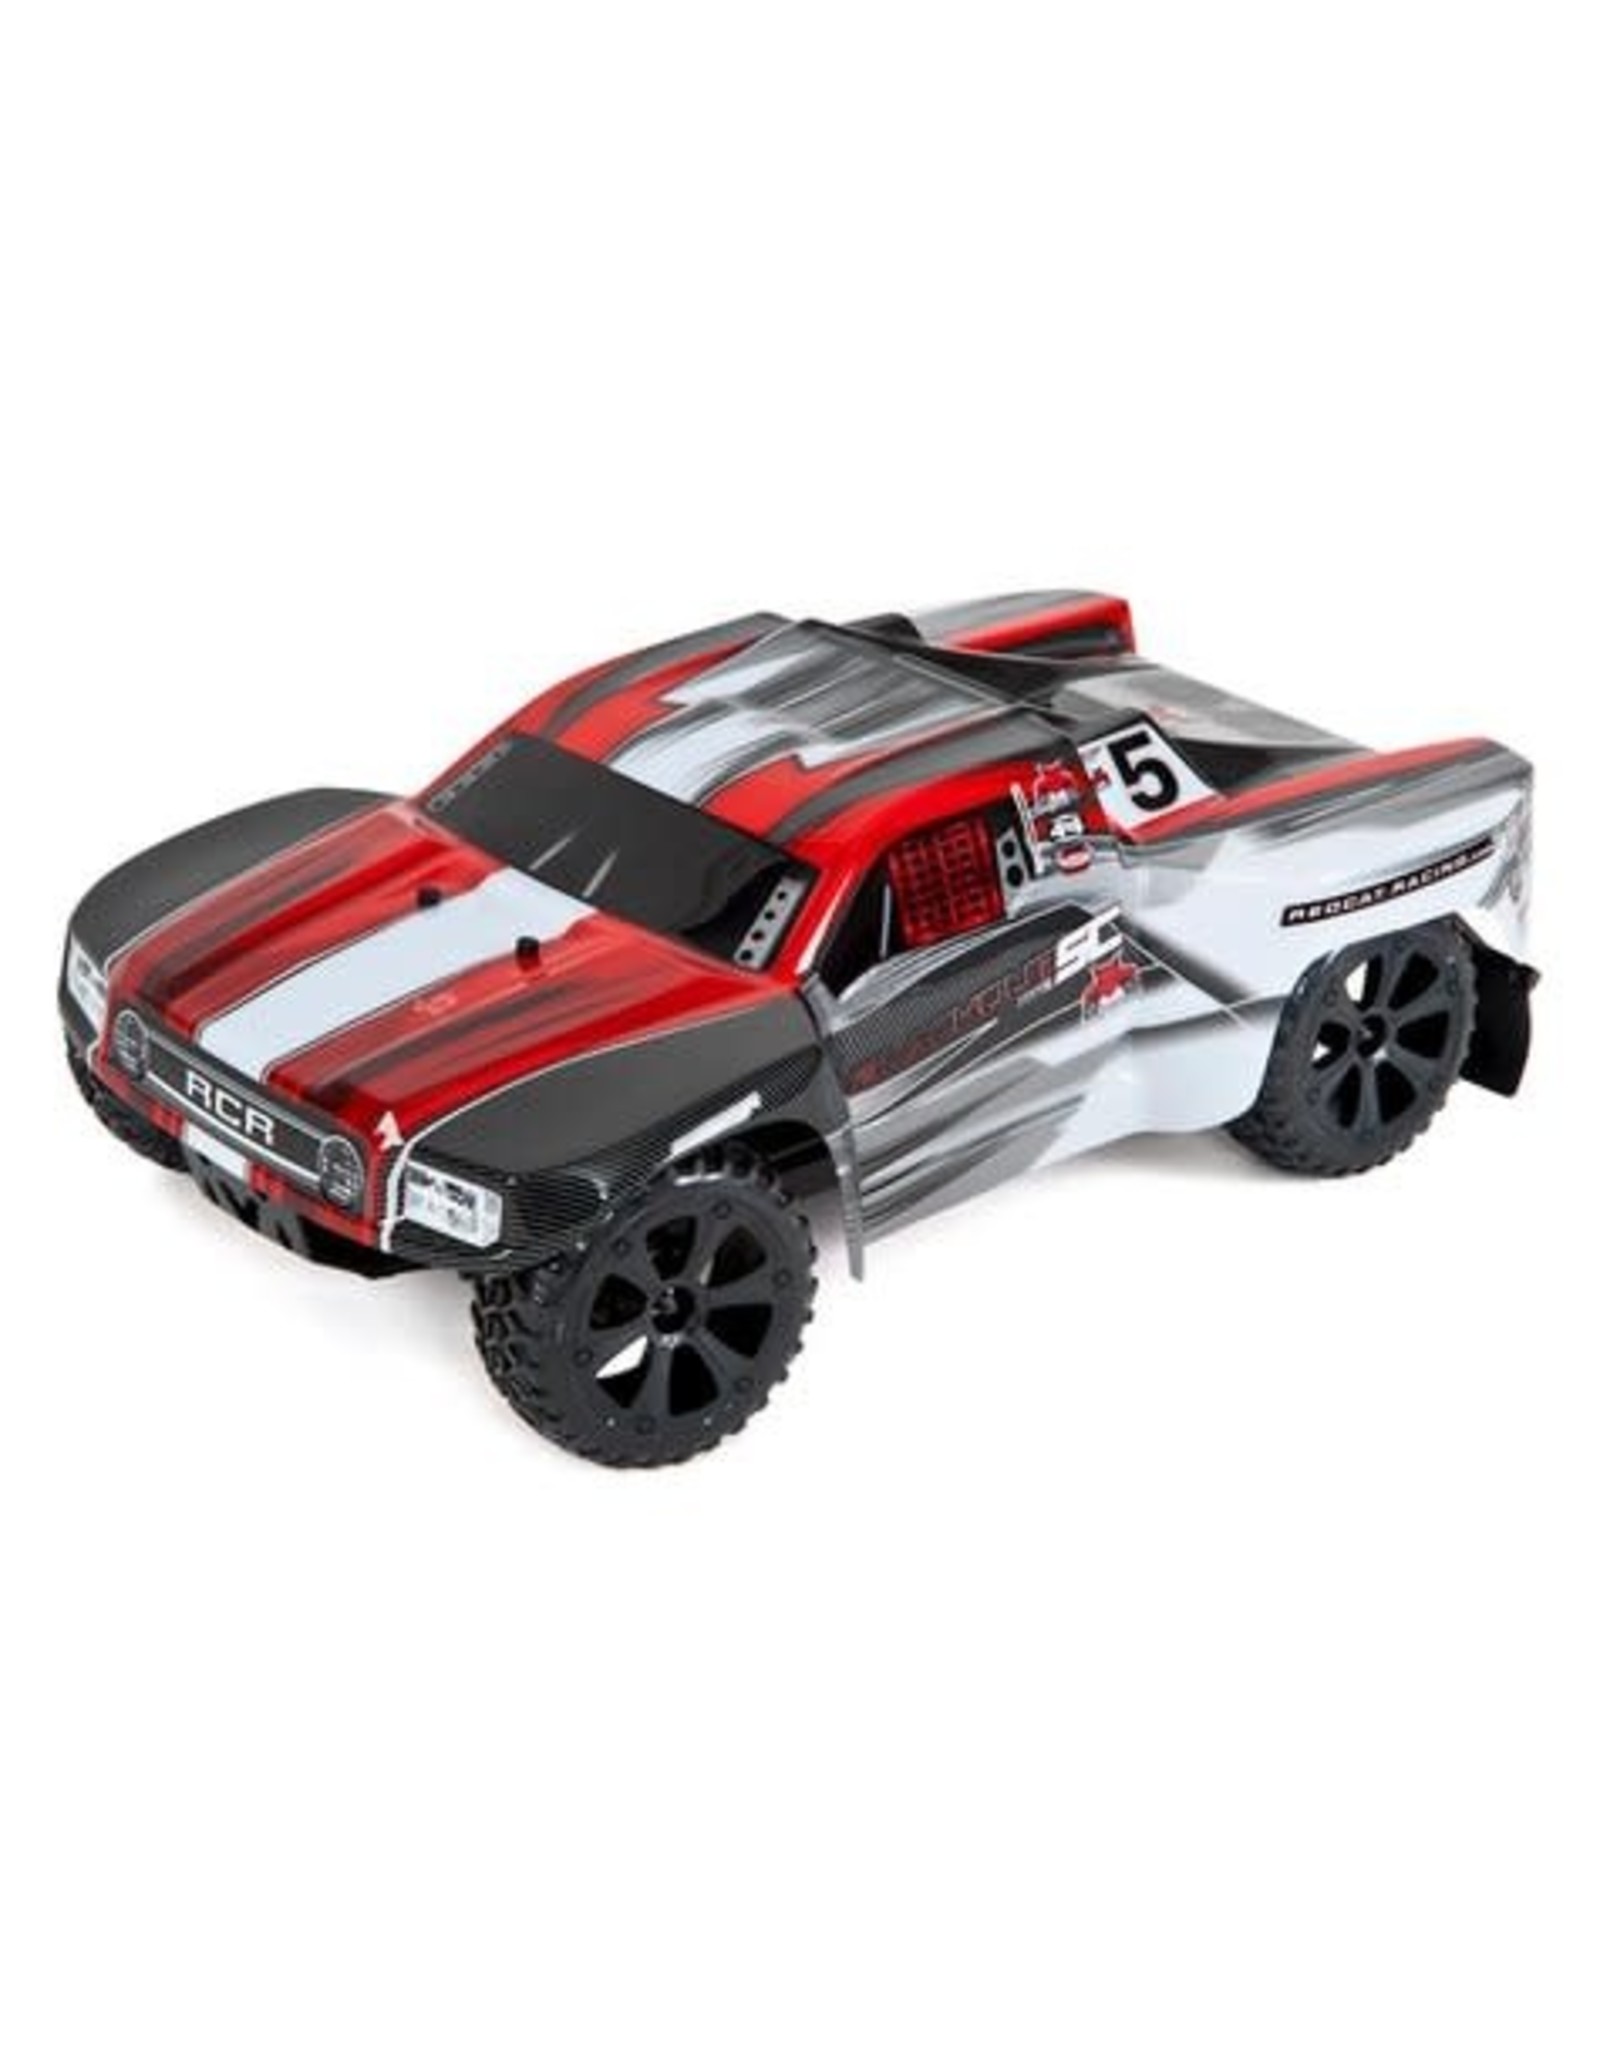 Redcat Racing Redcat Blackout SC RC Truck - 1:10 Brushed Electric Short Course Truck